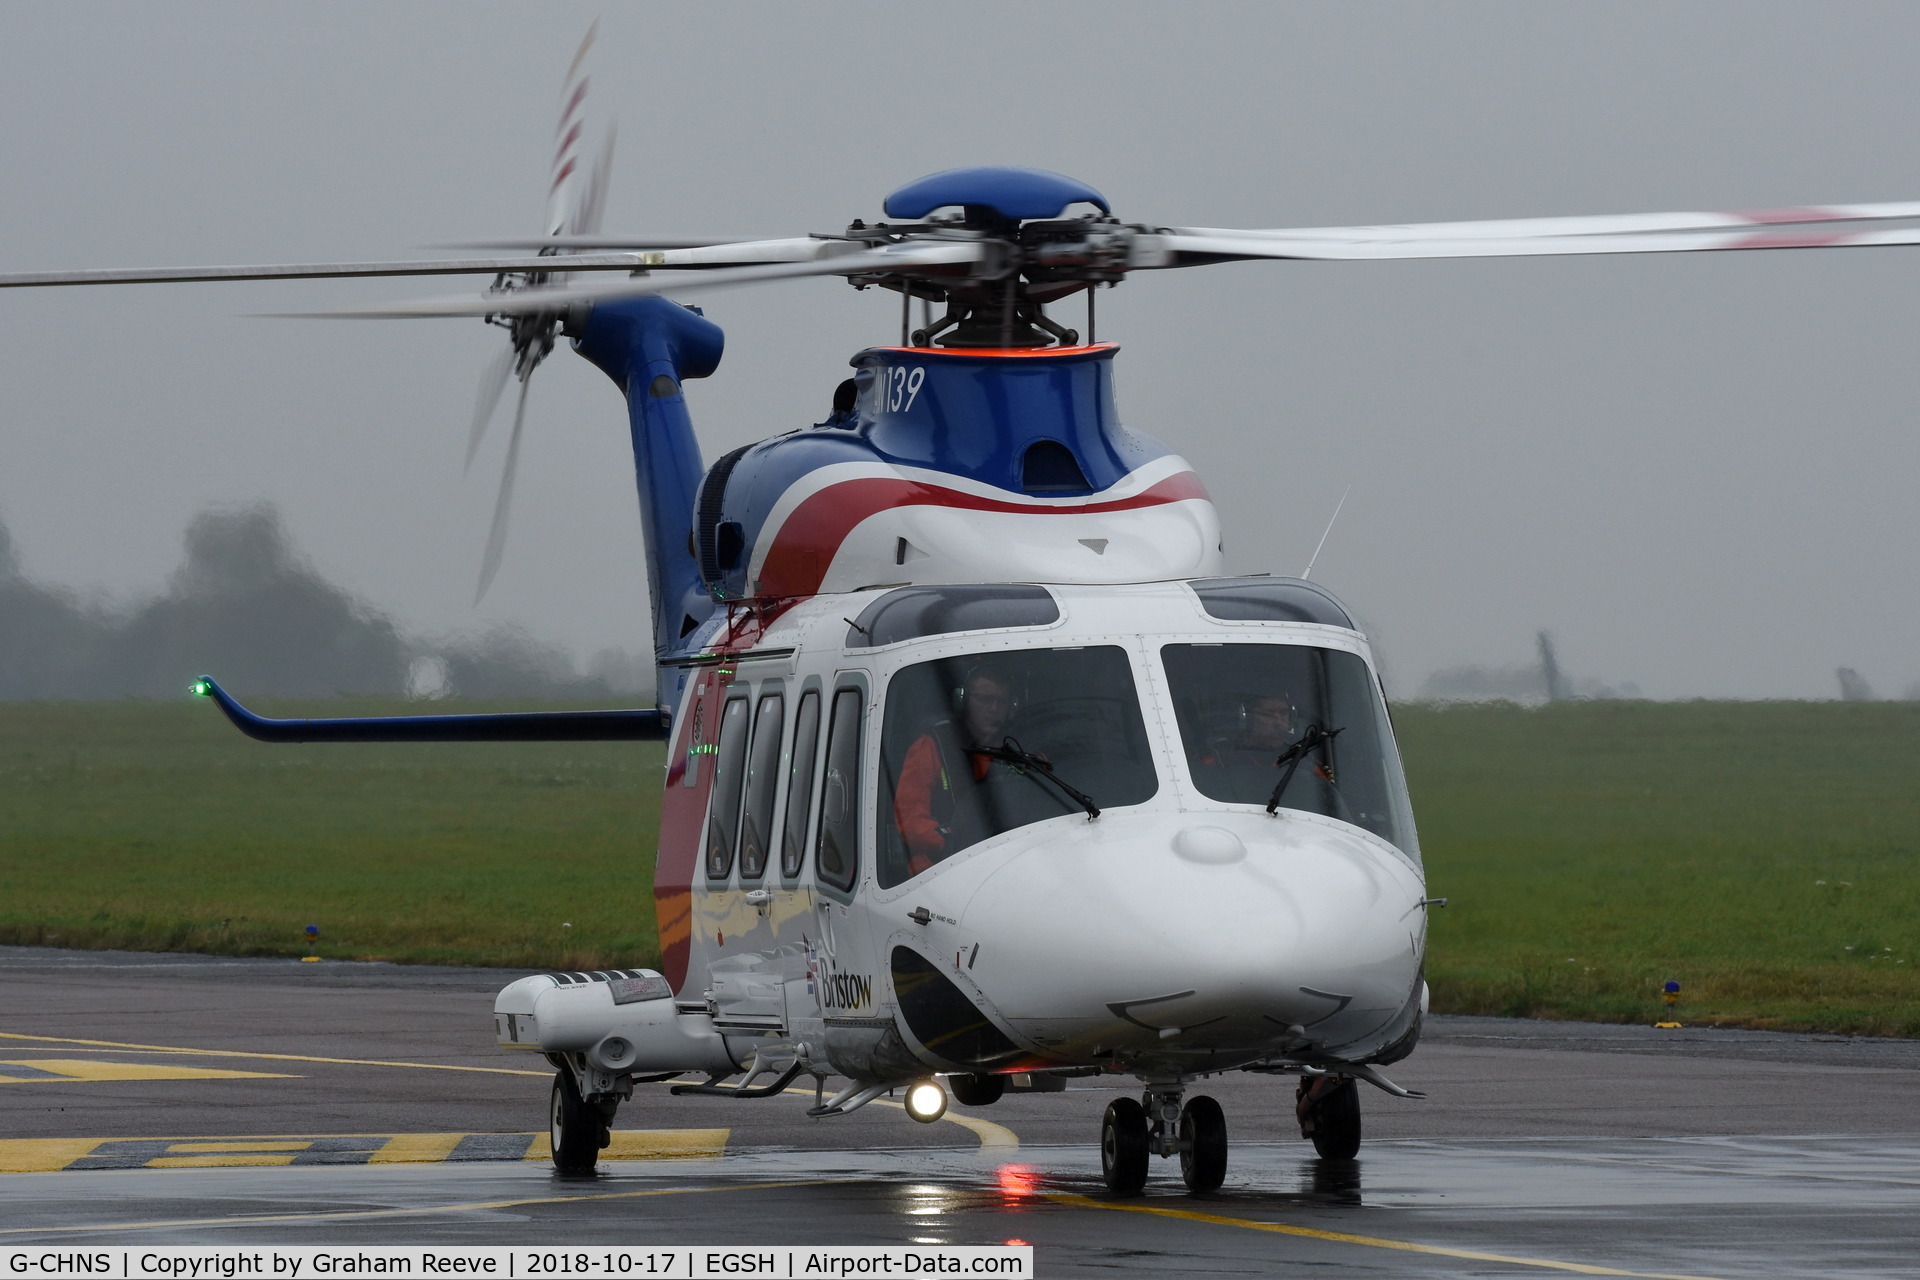 G-CHNS, 2012 AgustaWestland AW-139 C/N 31465, Heading for Bristow's on a murky afternoon.